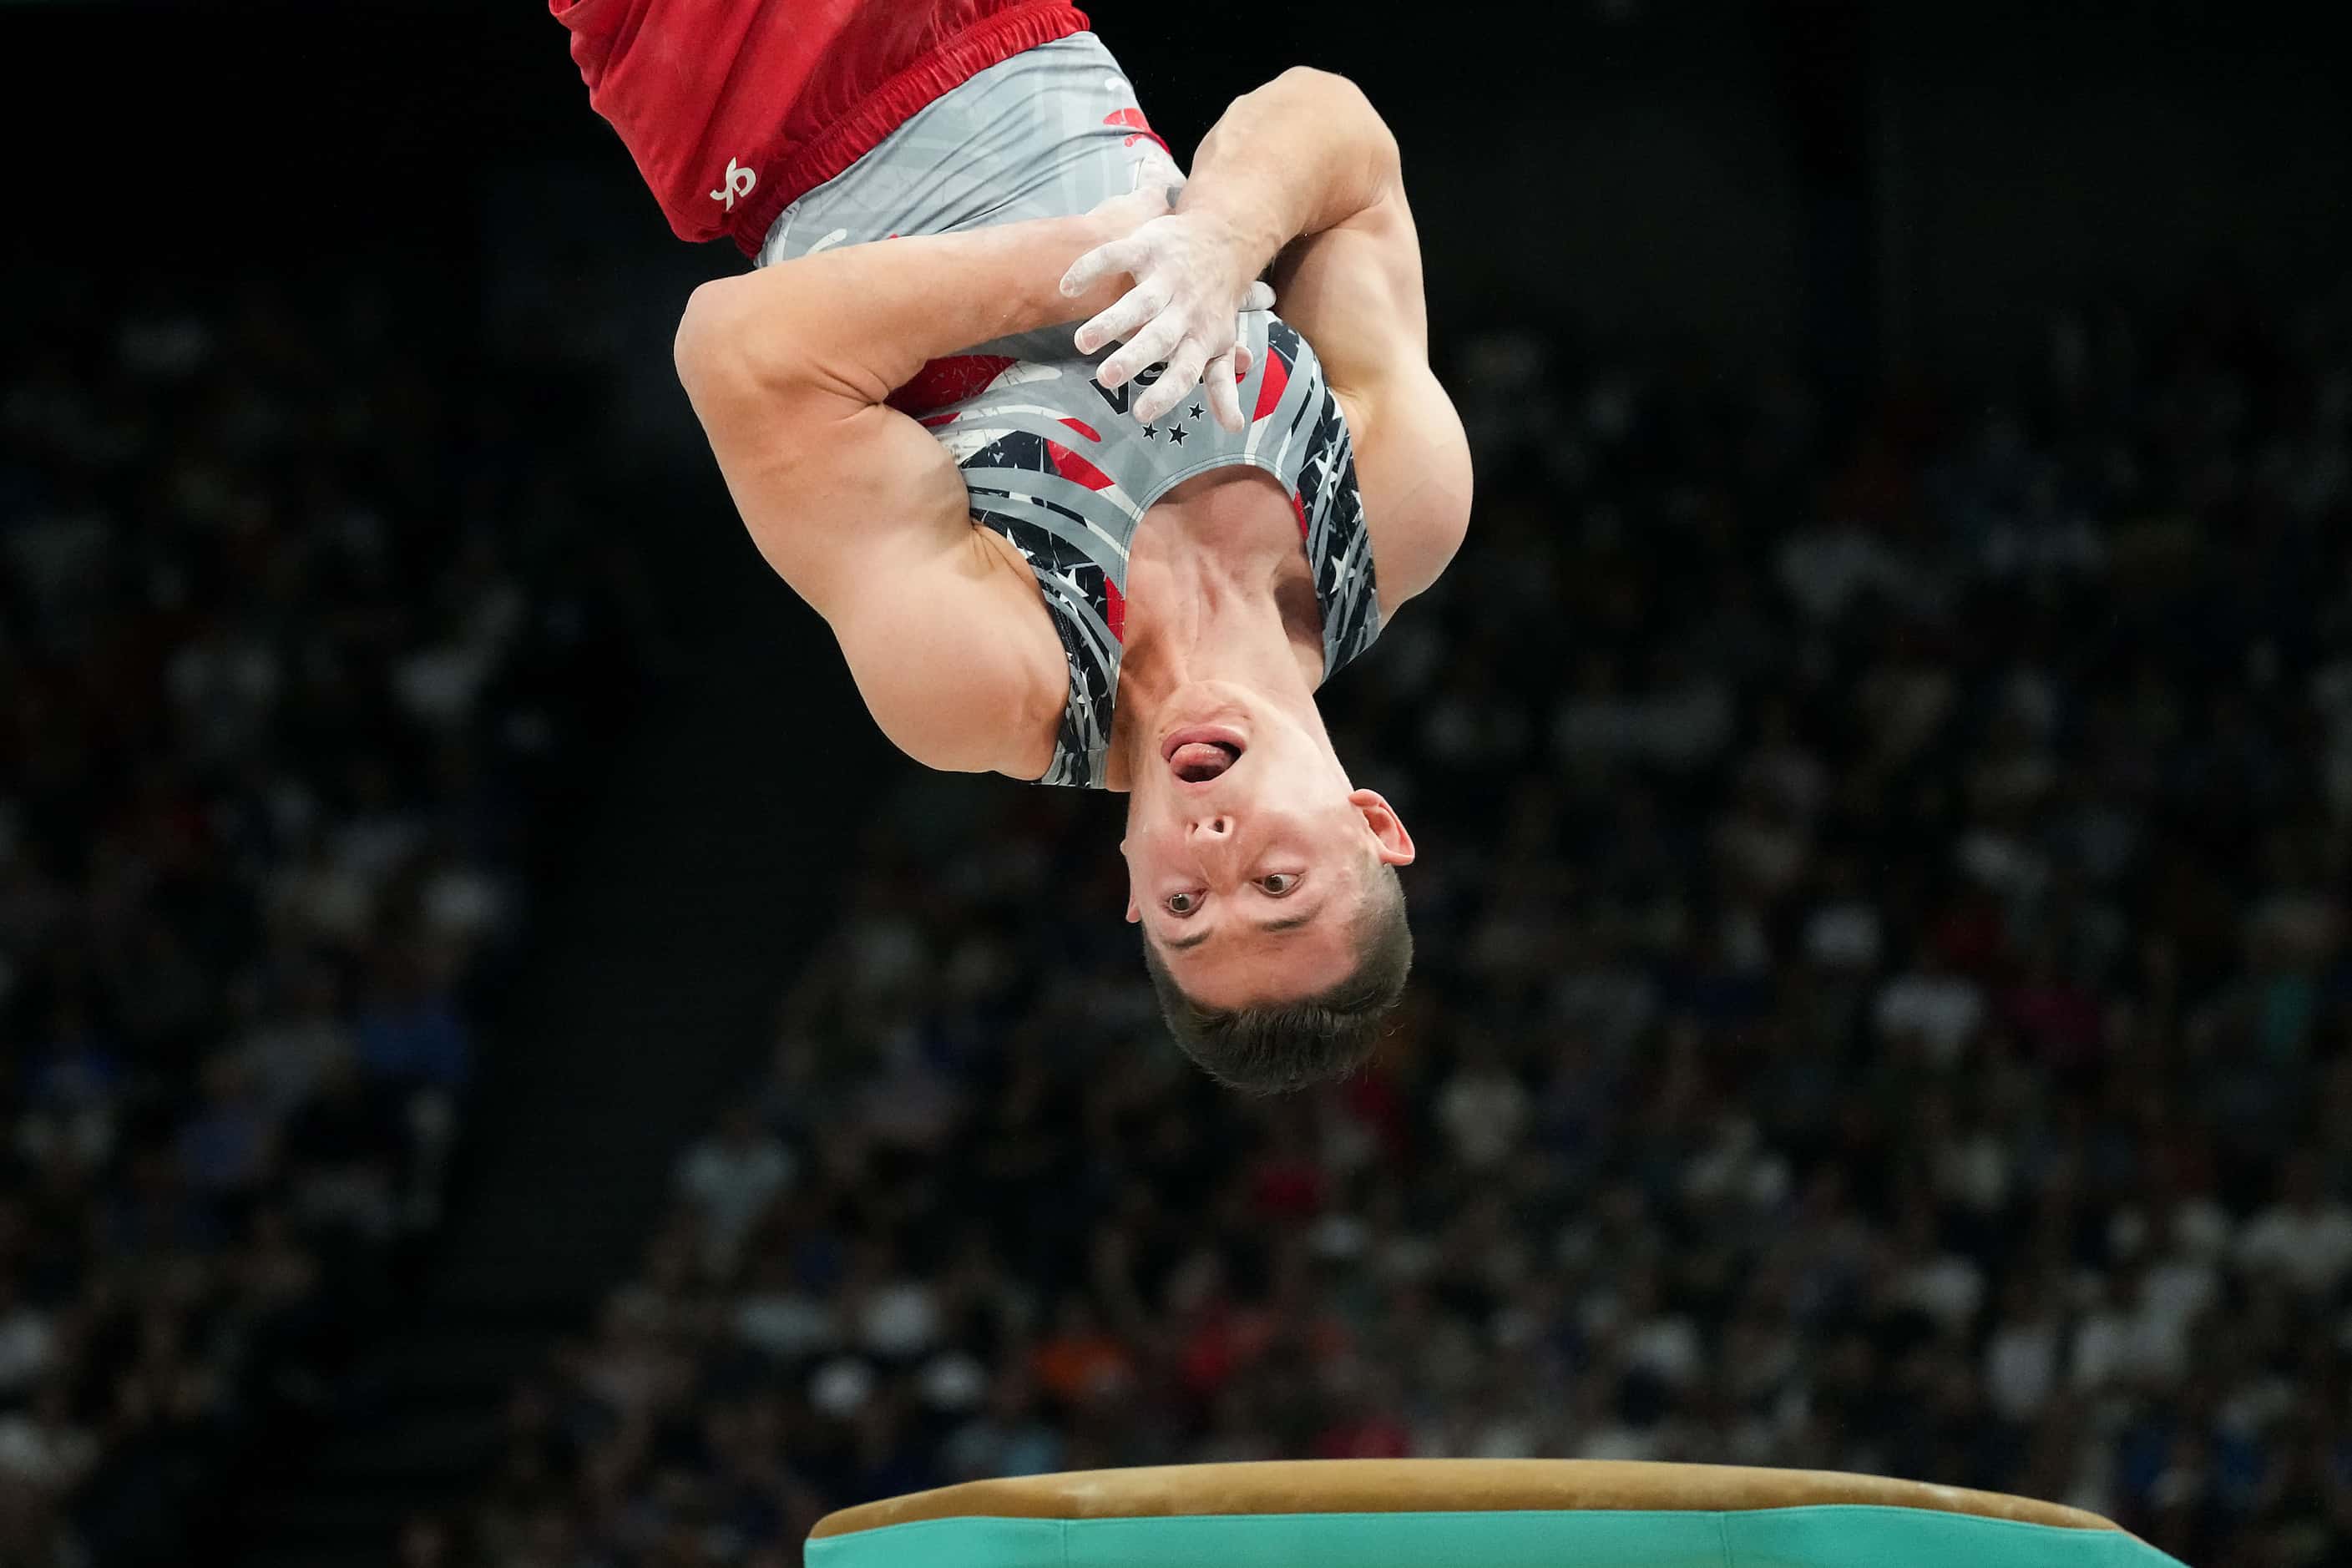 \Paul Juda  of the United States competes on the vault during the men’s gymnastics team...